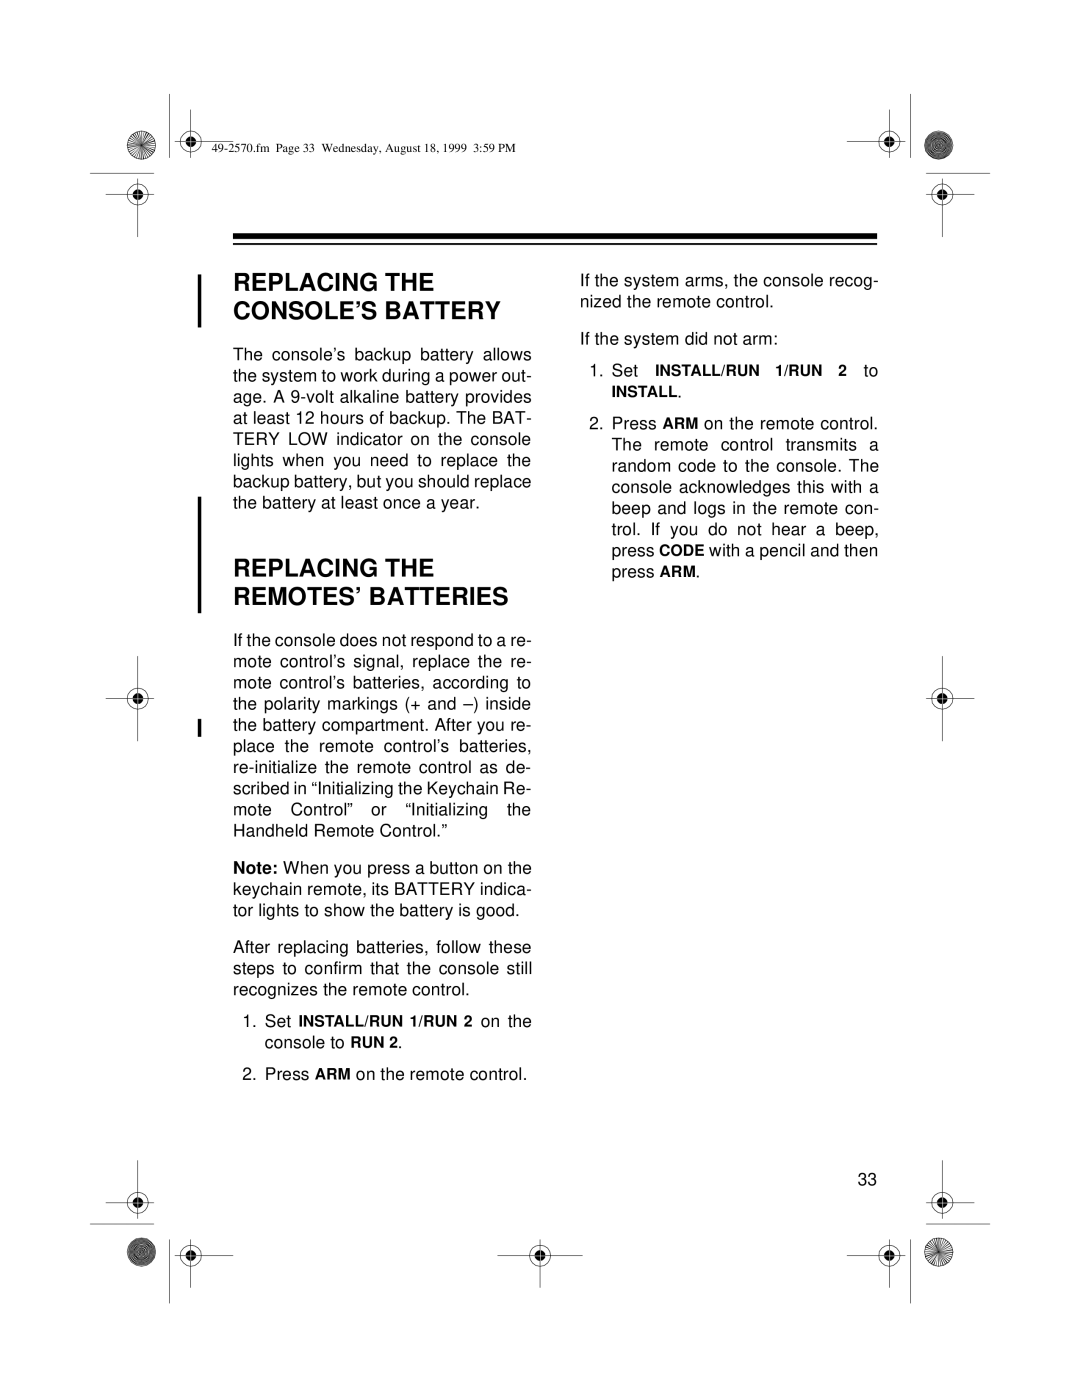 Radio Shack 49-2570 owner manual Replacing The Console’S Battery, Replacing The Remotes’ Batteries 